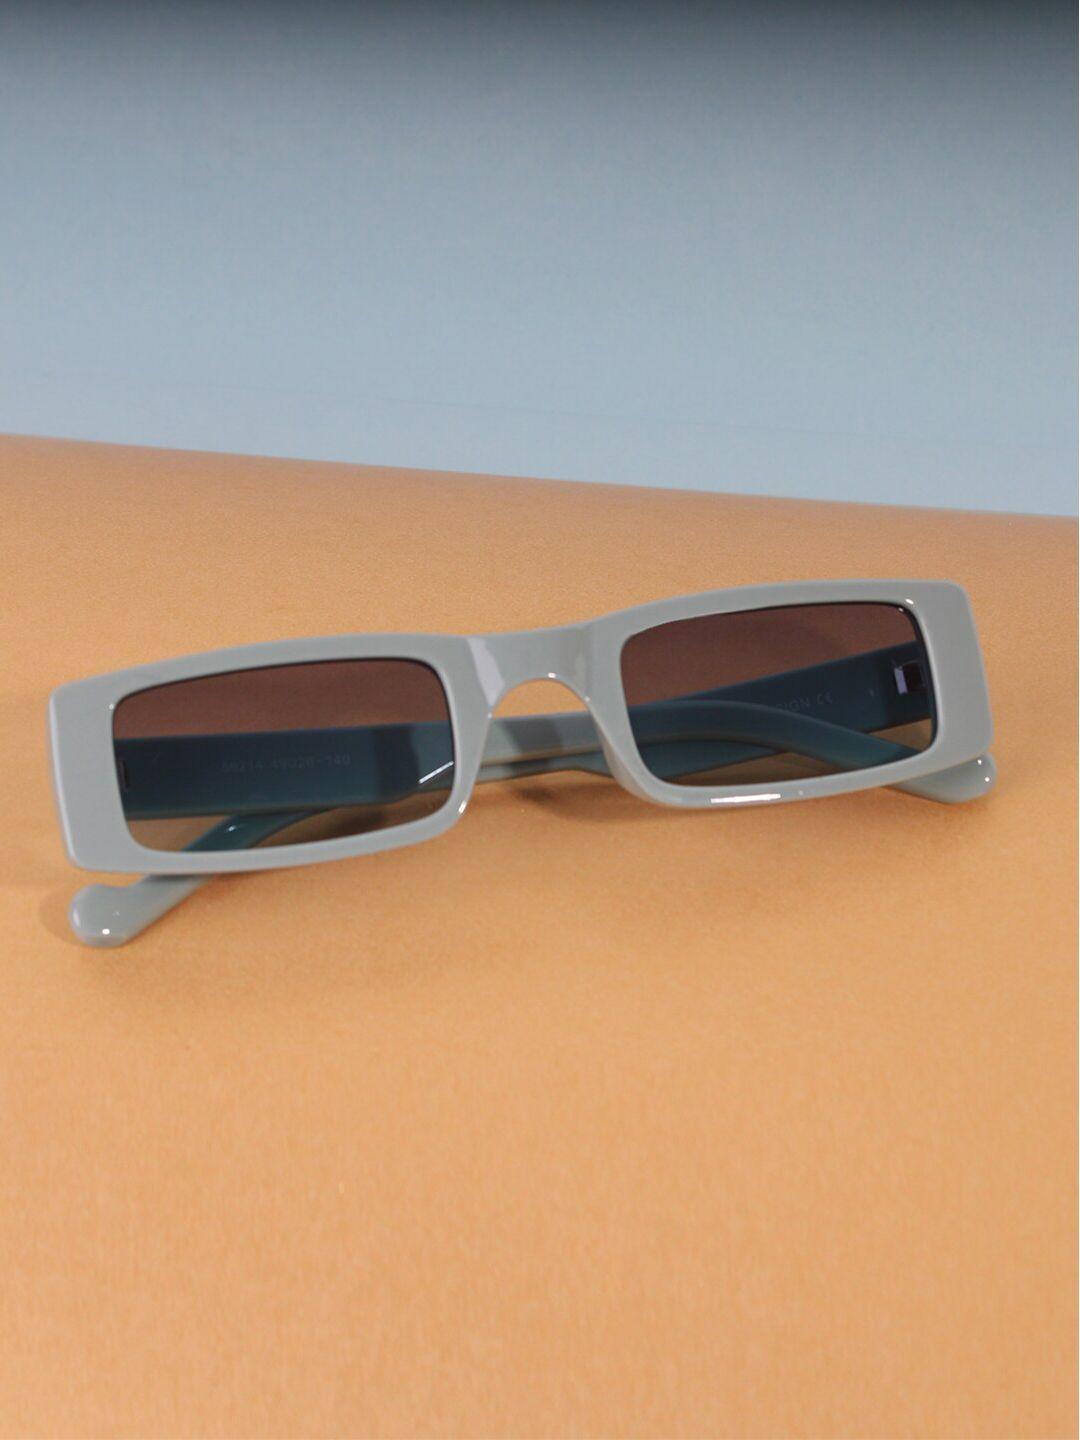 quirky unisex rectangle uv protected lens sunglasses